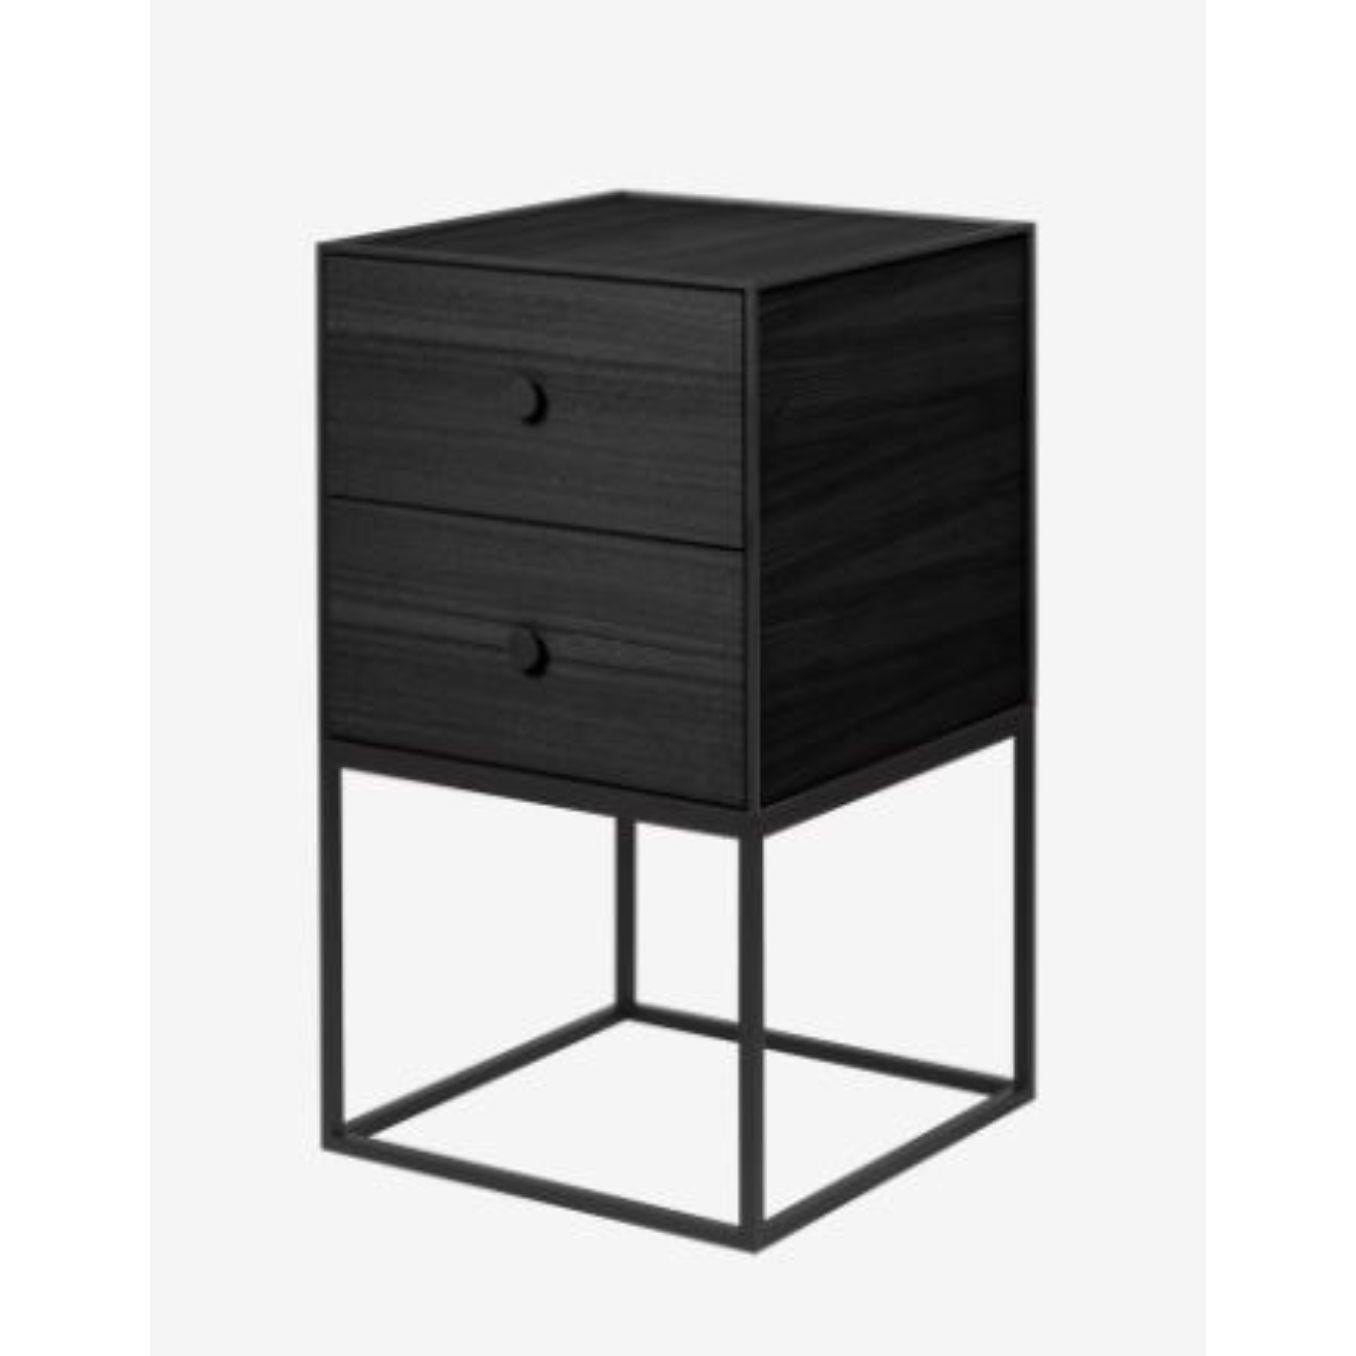 35 black ash frame sideboard with 2 drawers by Lassen.
Dimensions: D 35 x W 35 x H 63 cm. 
Materials: Finér, Melamin, Melamine, Metal, Veneer, Ash
Also available in different colors and dimensions. 
Weight: 15.50 Kg

By Lassen is a Danish